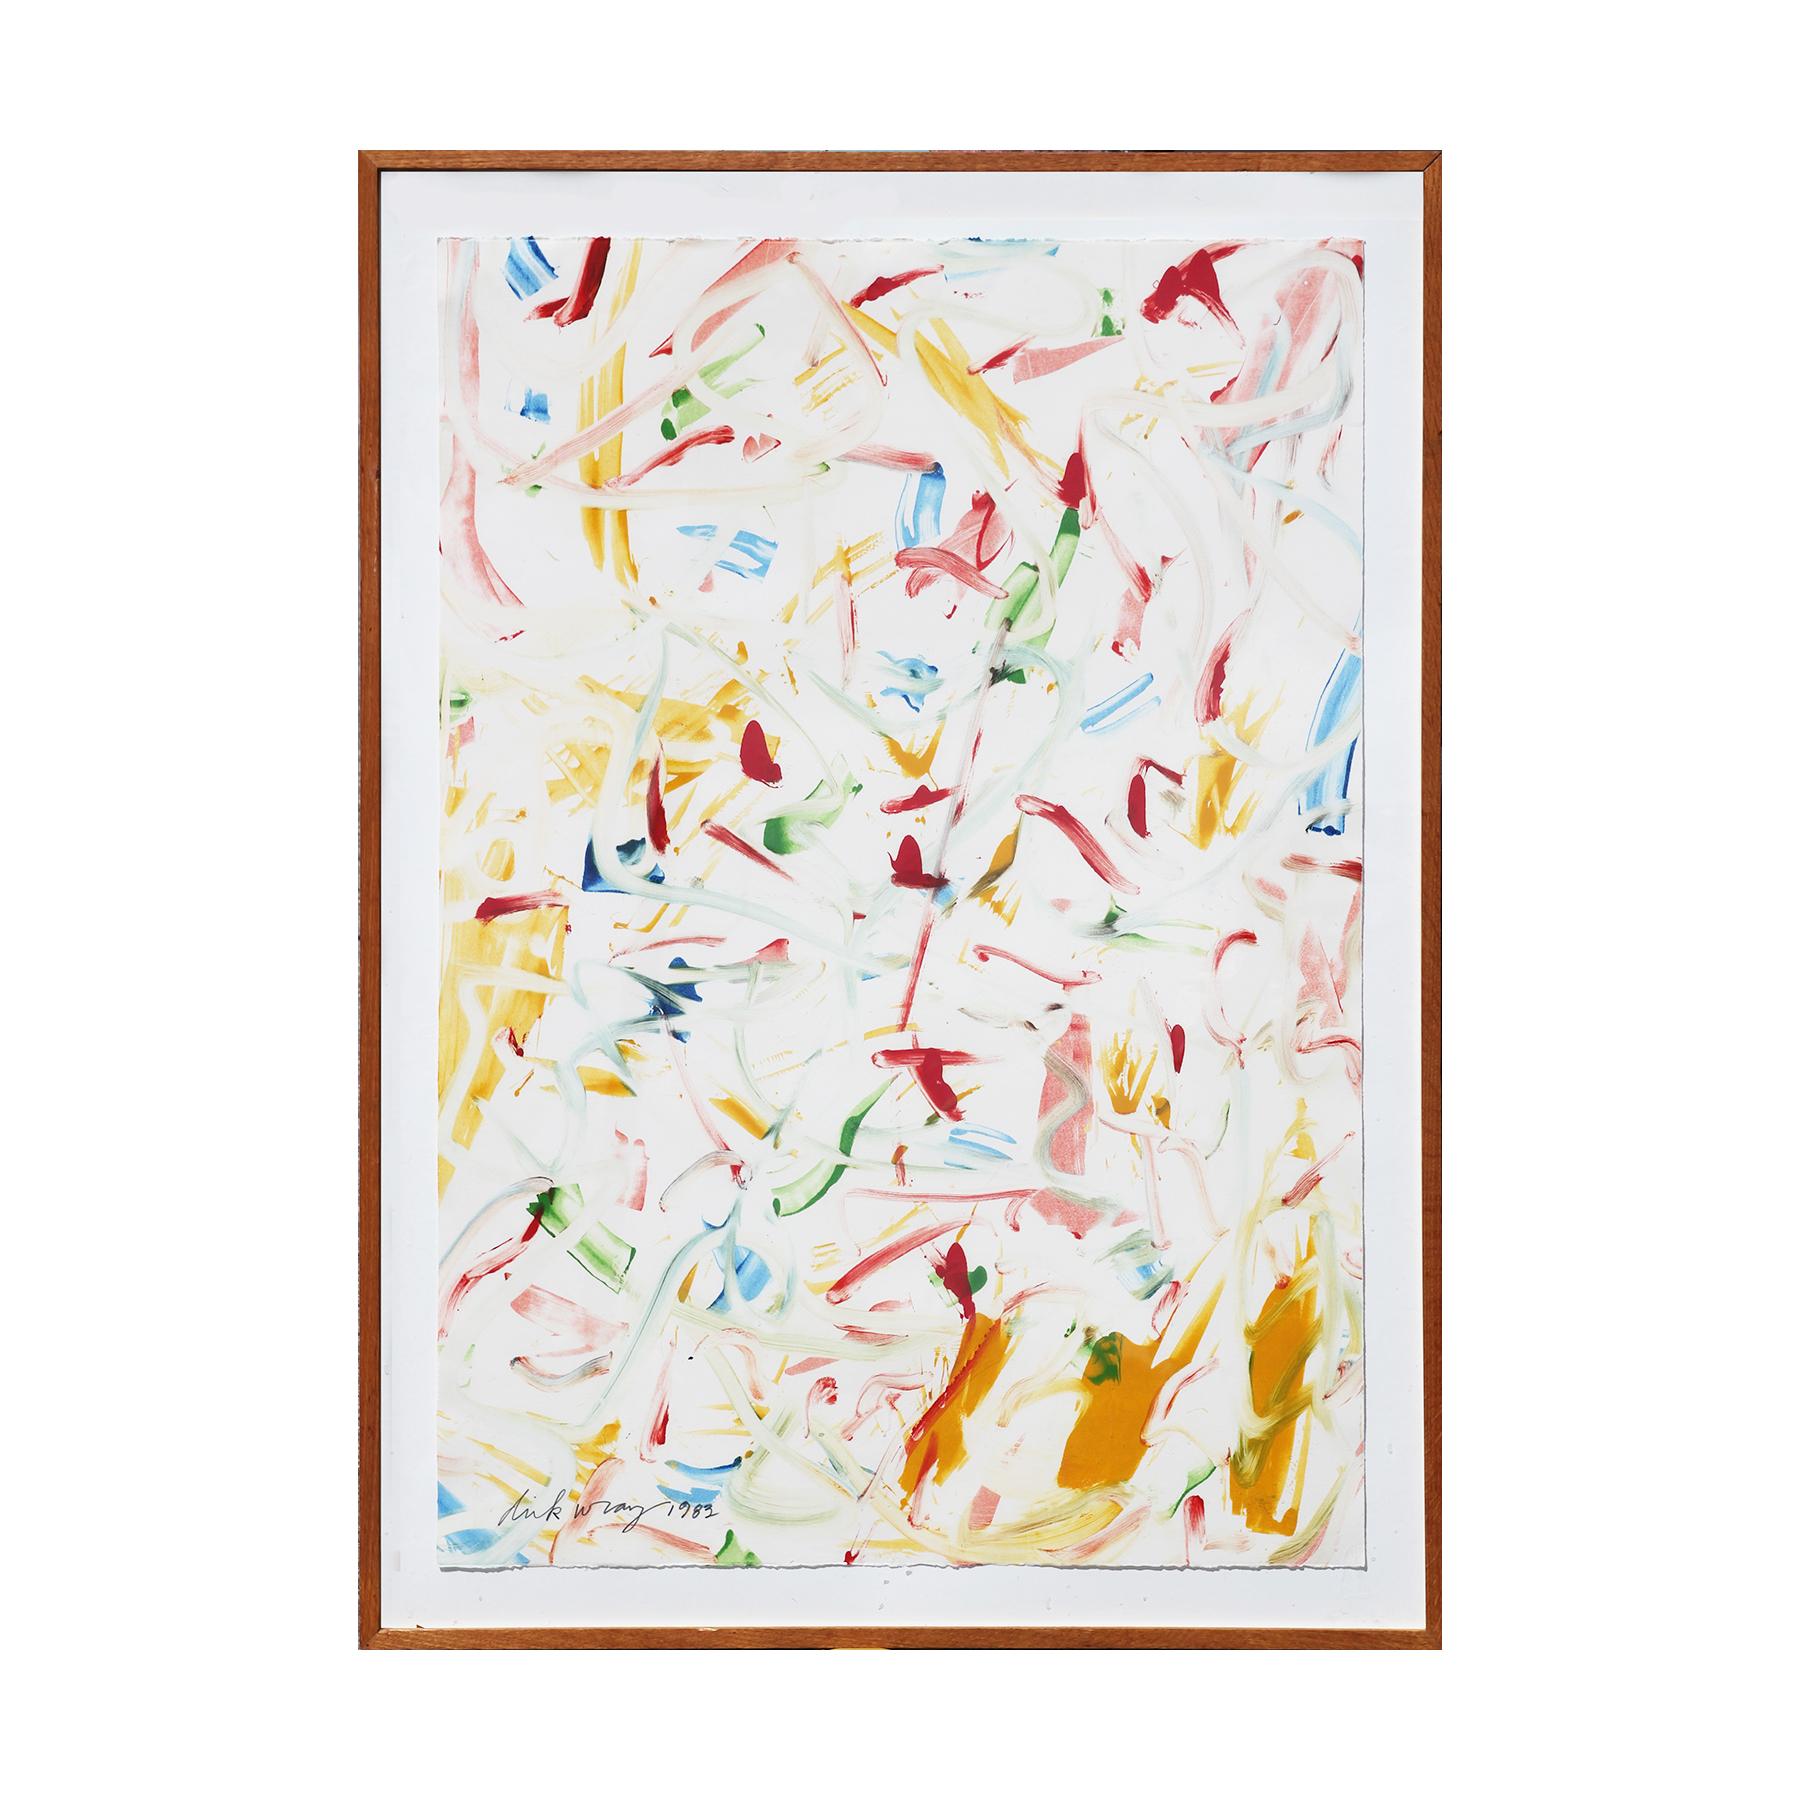 Dick Wray Abstract Print - Red, Blue, Yellow, & Green Toned Colorful Modern Abstract Expressionist Monotype